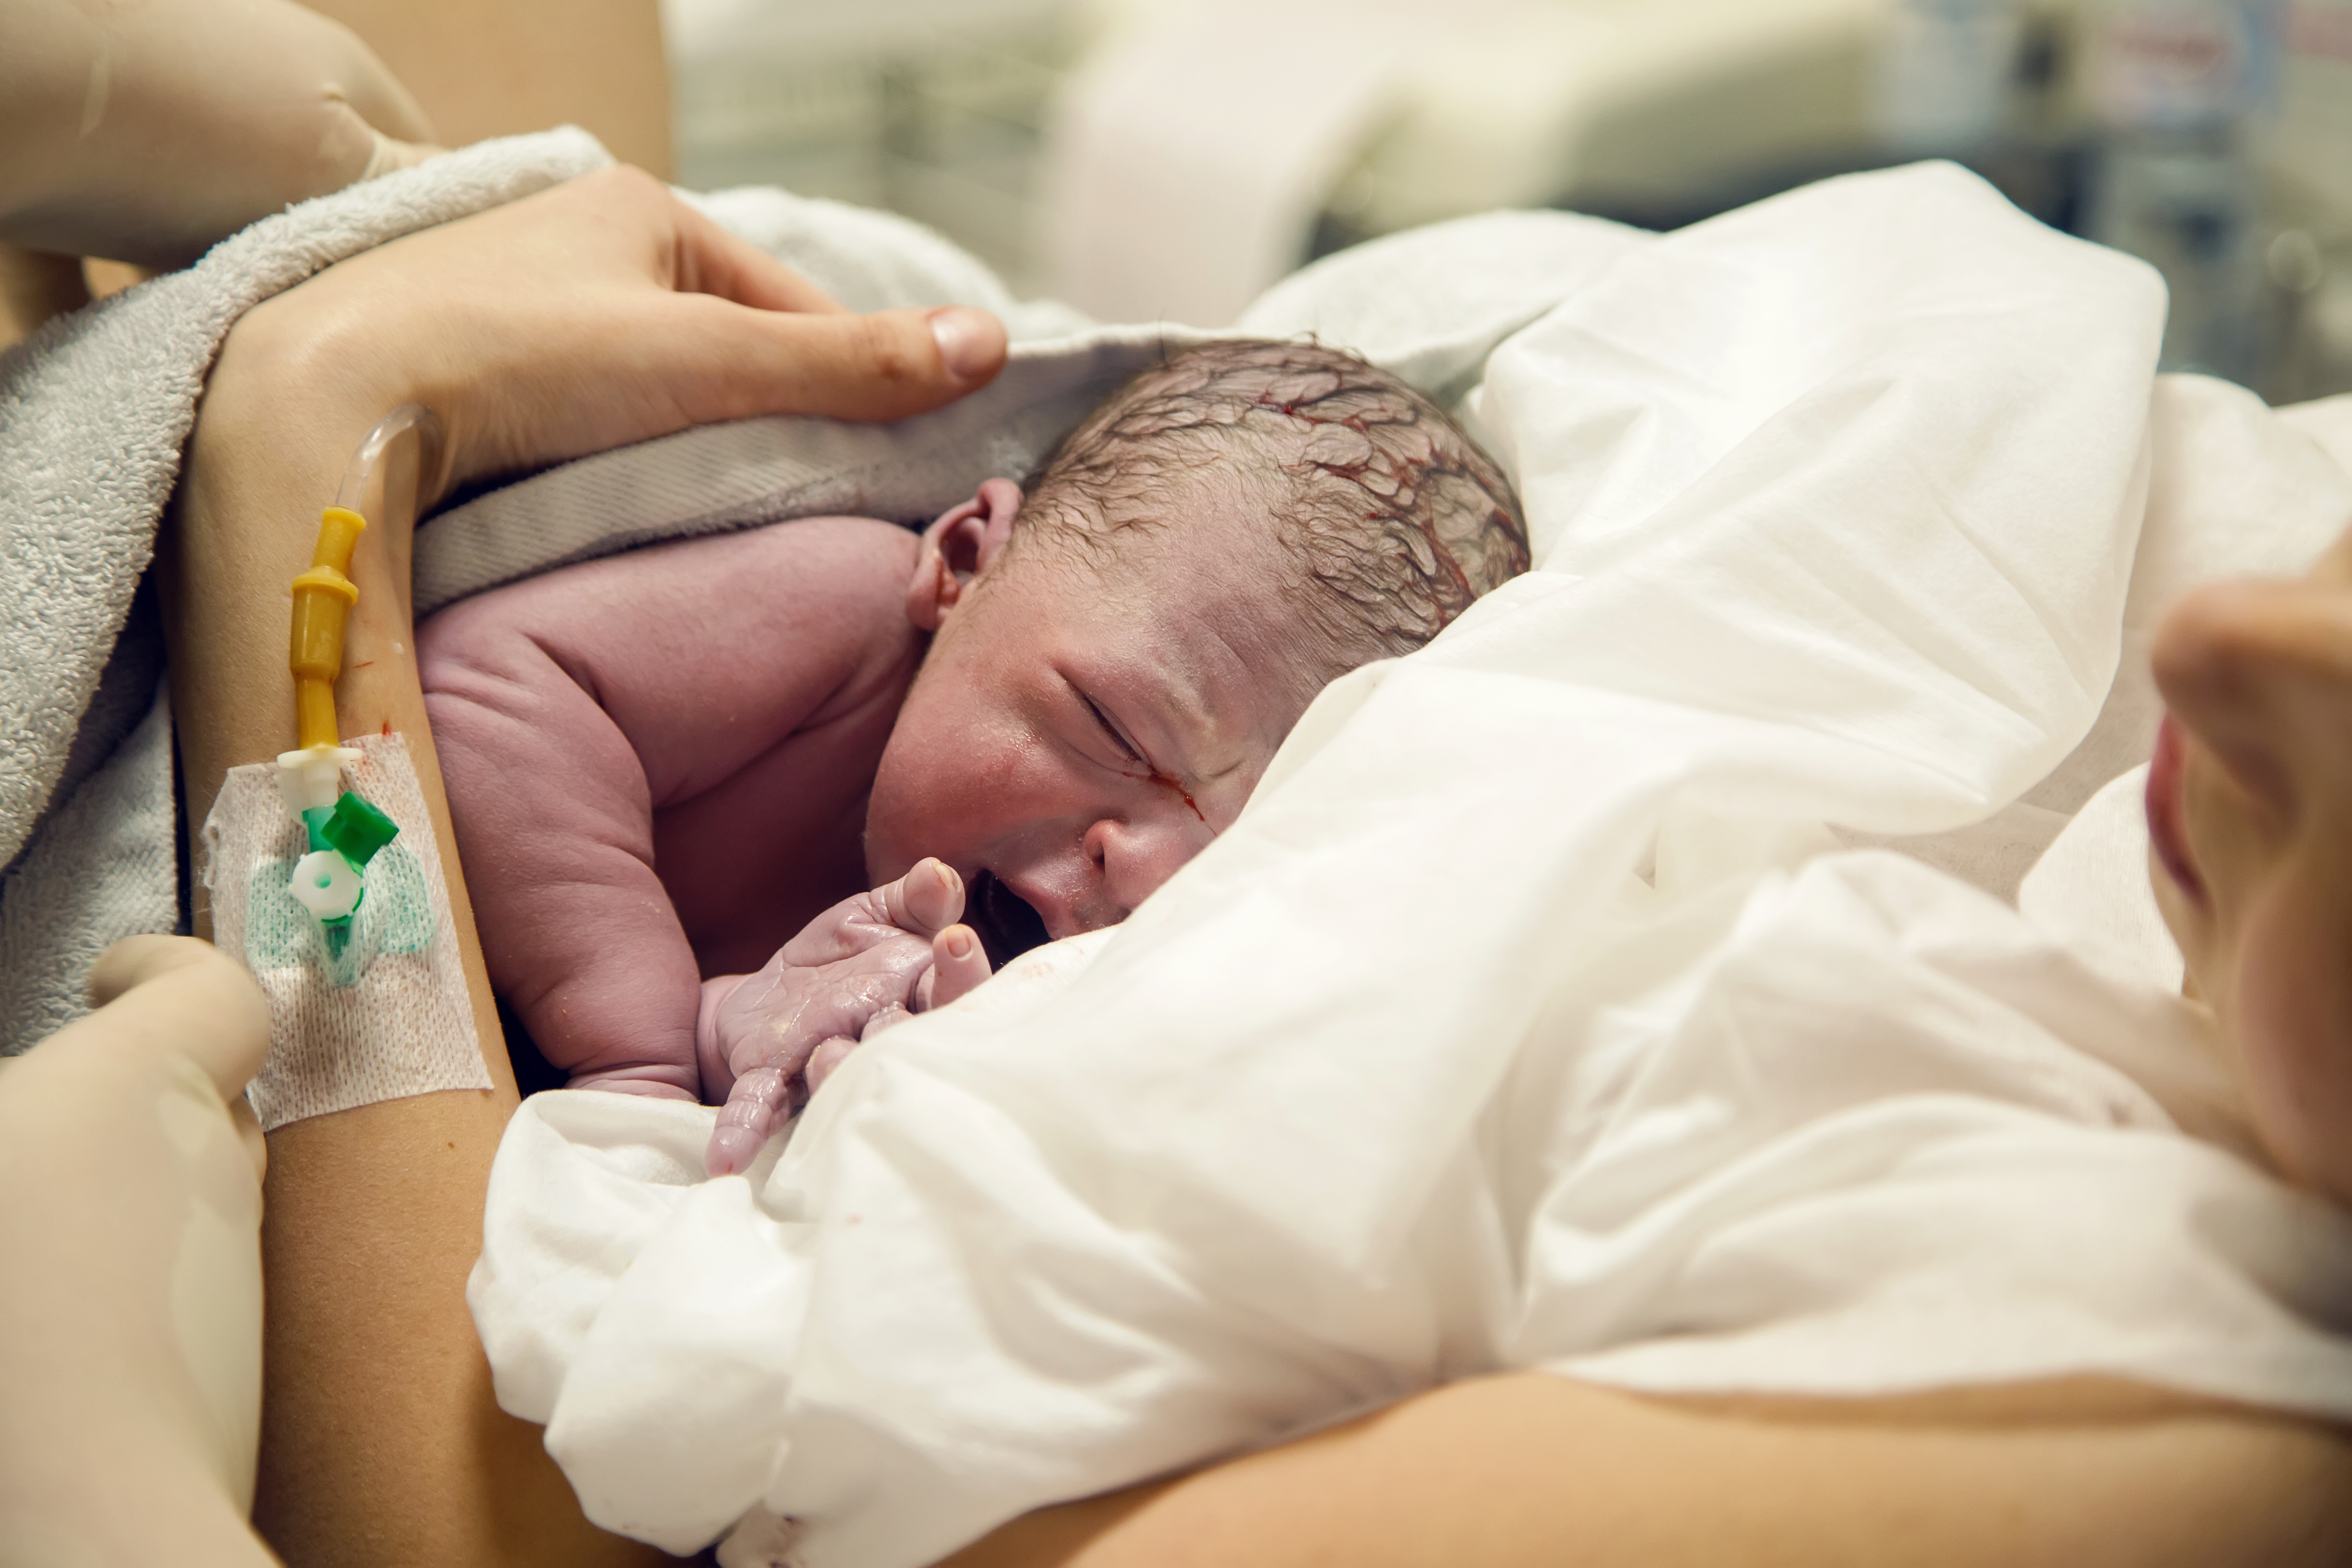 Childbirth errors can cause serious injury